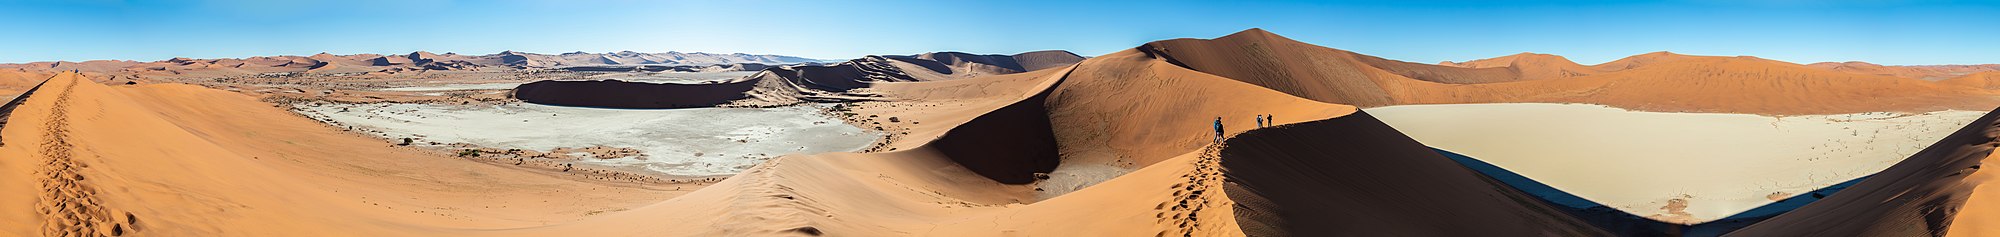 Panoramic view of the landscape around Sossusvlei, Namibia.